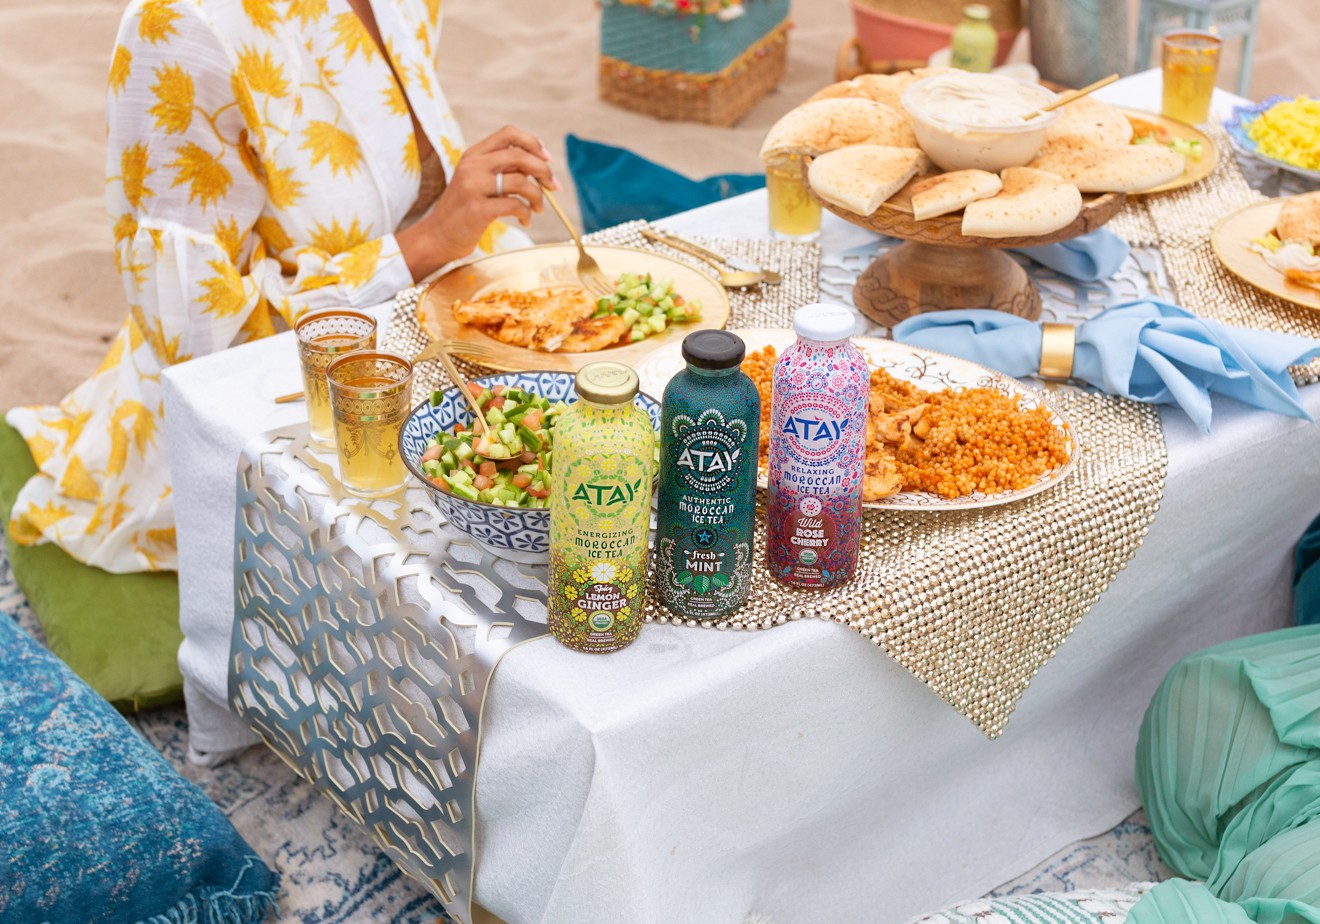 Moroccan Picnic with Atay Tea by popular California life and style blogger, Laura Lily: image of woman sitting in the sand for a moroccan picnic at the beach with gold beaded placemats, various moroccan foods, blue pillows, blue linen napkins, gold embellished moroccan cups, gold plate, gold silverware, and Atay Tea.